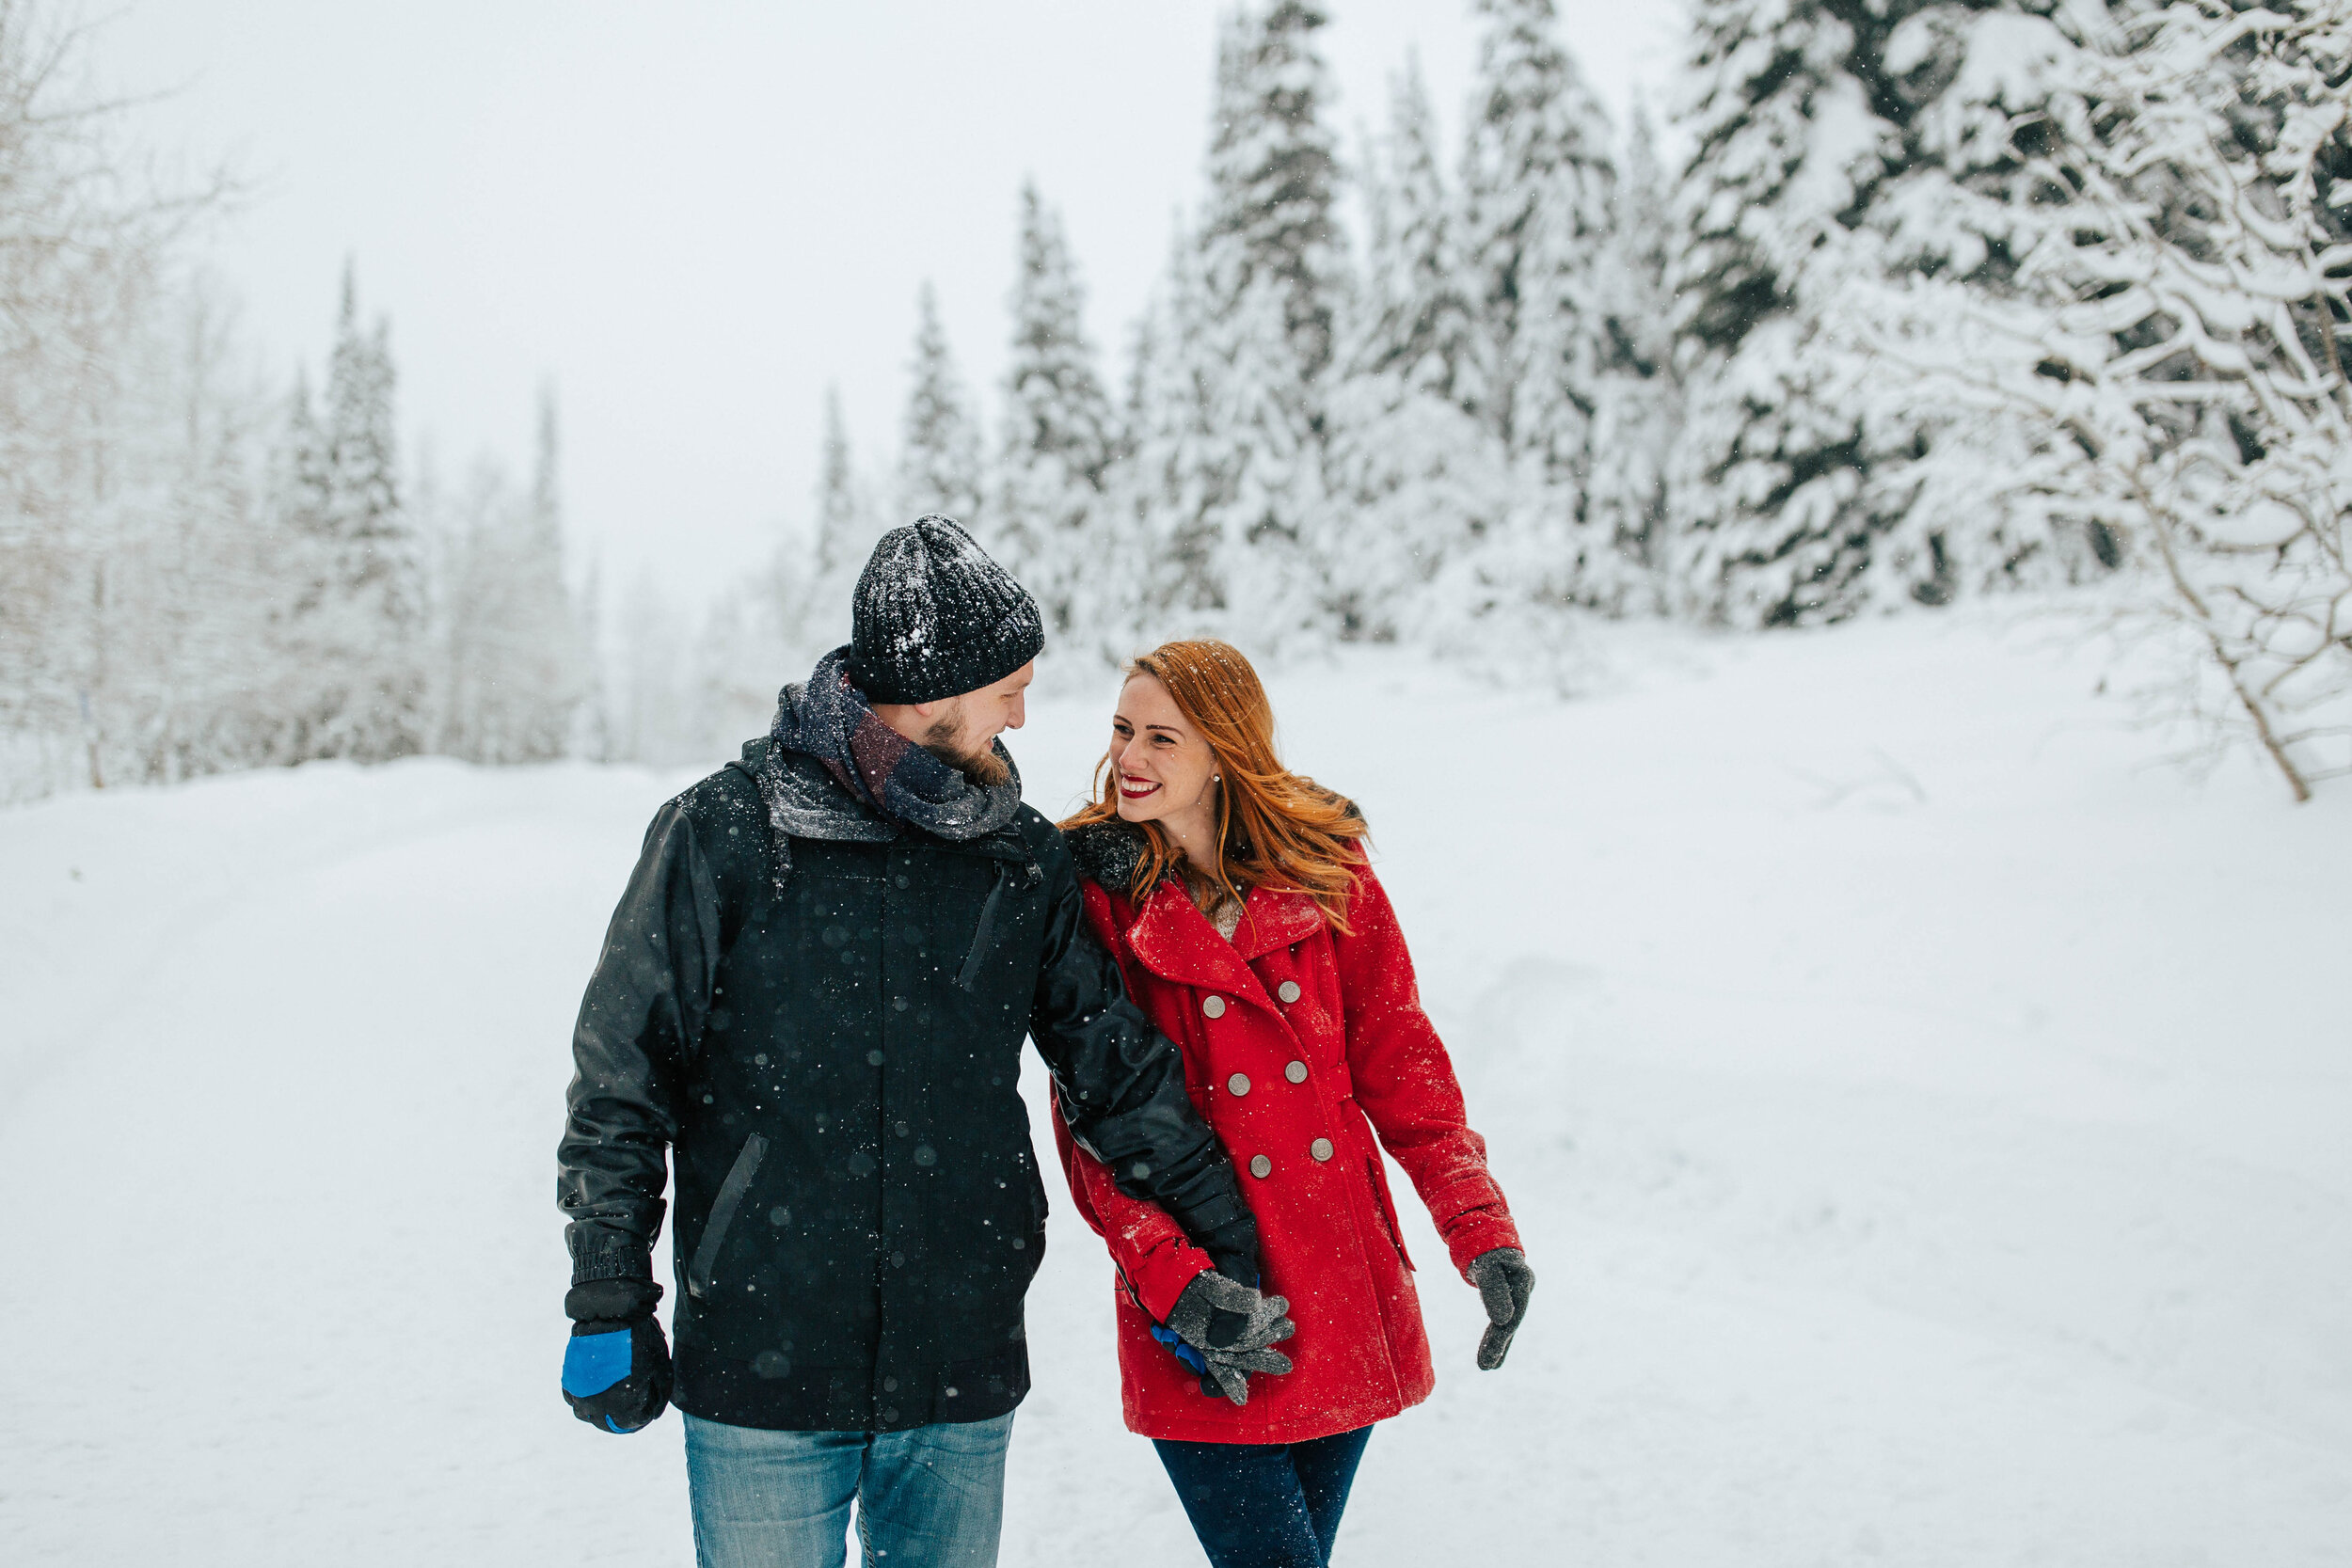 Winter couples session engagements snow mountains cozy wrapped in blanket #coupleshoot #utahphotographer #weddingphotographer #engagementsession #engagementshoot laughing